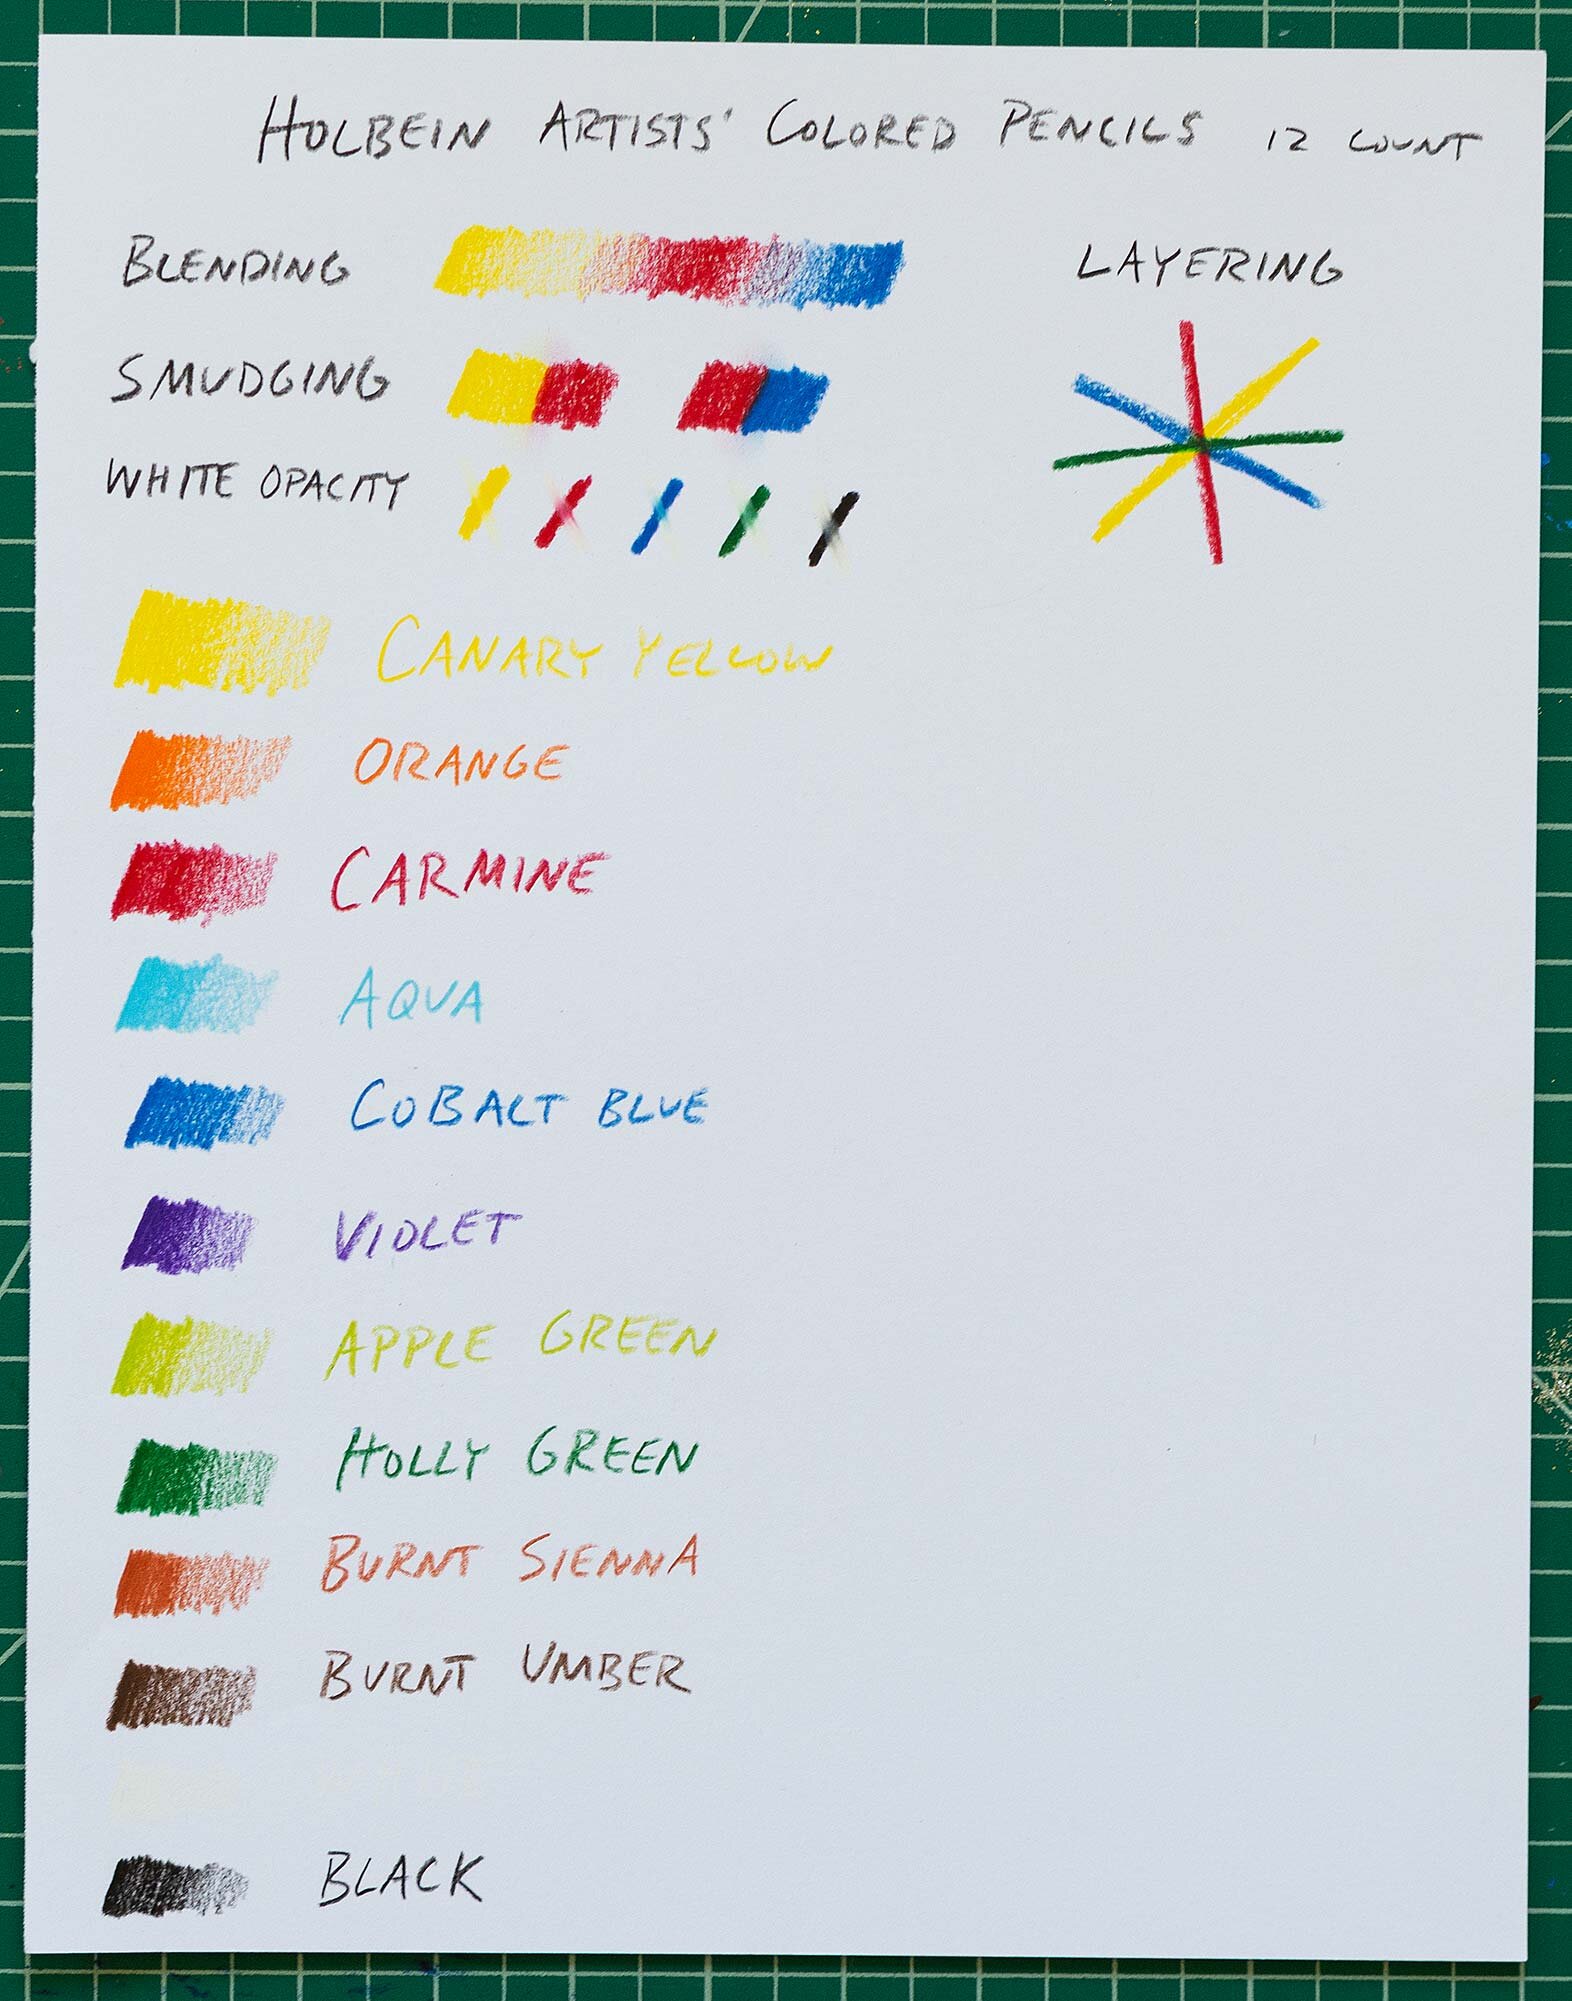 Colored Pencil Swatches - Xylos Art and Design